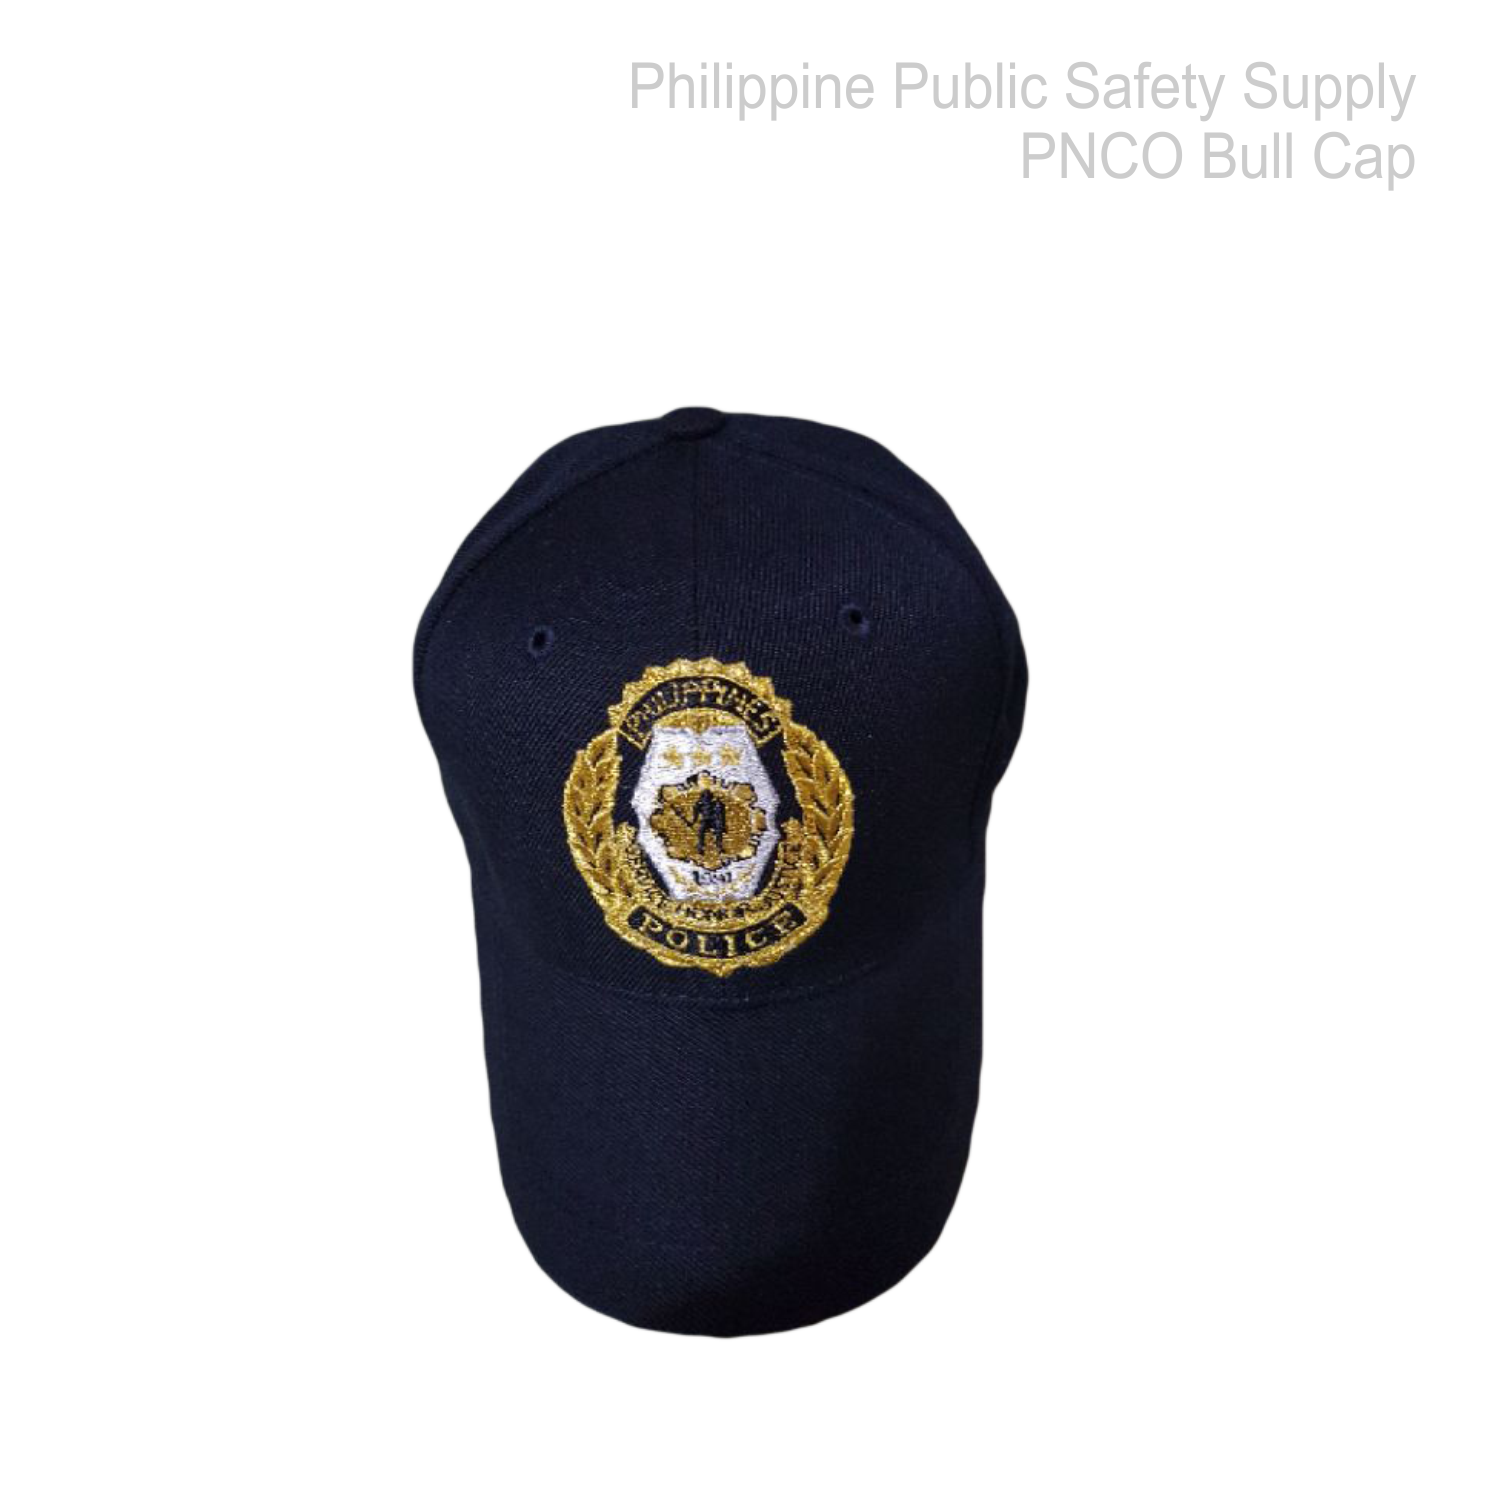 Police Non-Commissioned Officers (PNCO) Bullcap - PNP